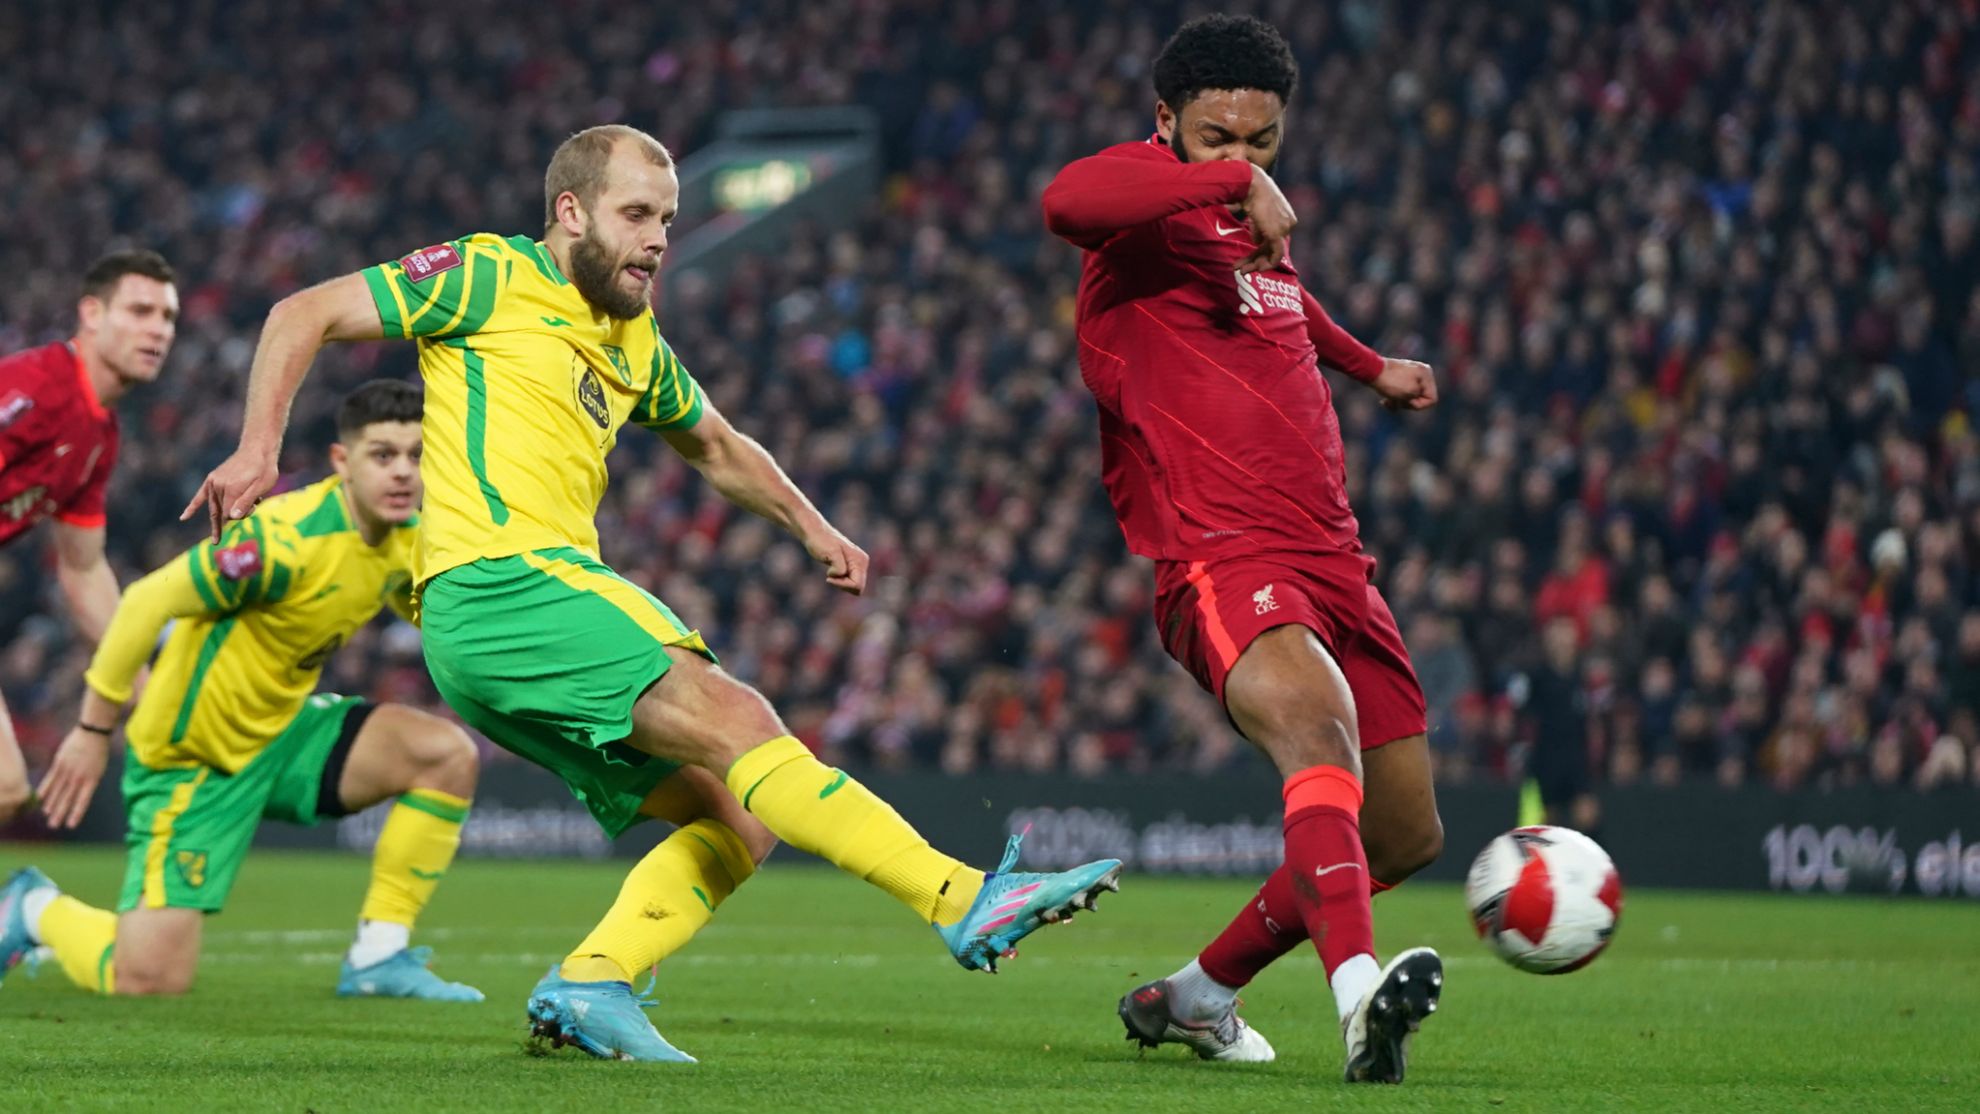 FA Cup: Liverpool 2-1 Norwich - Goals and highlights - FA Cup 21/22 | Marca